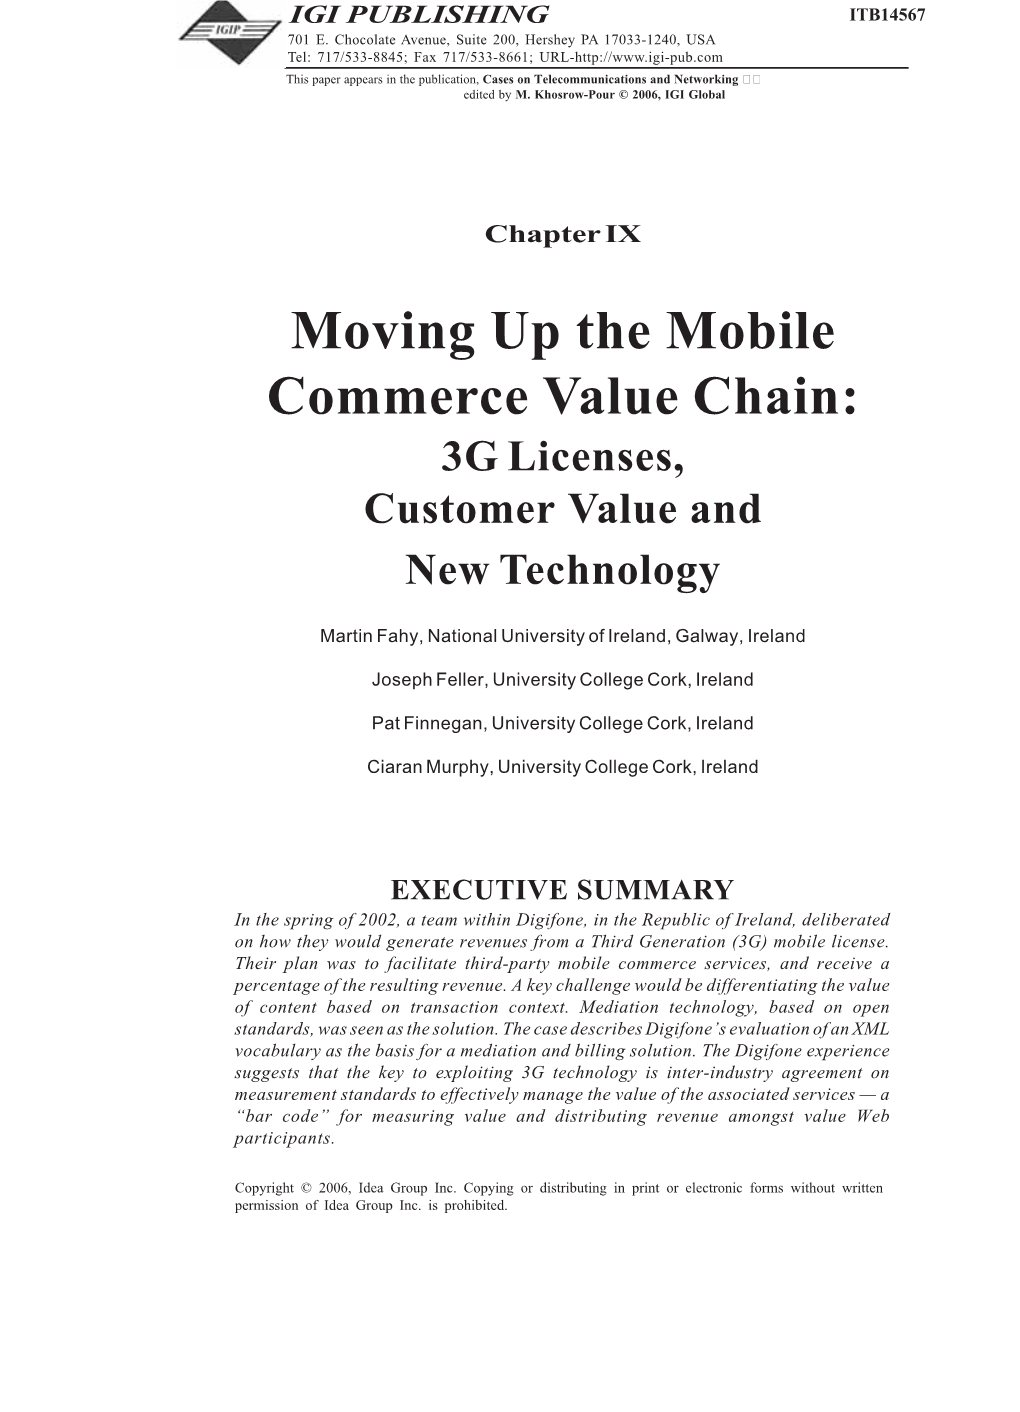 Moving up the Mobile Commerce Value Chain: 3G Licenses, Customer Value and New Technology